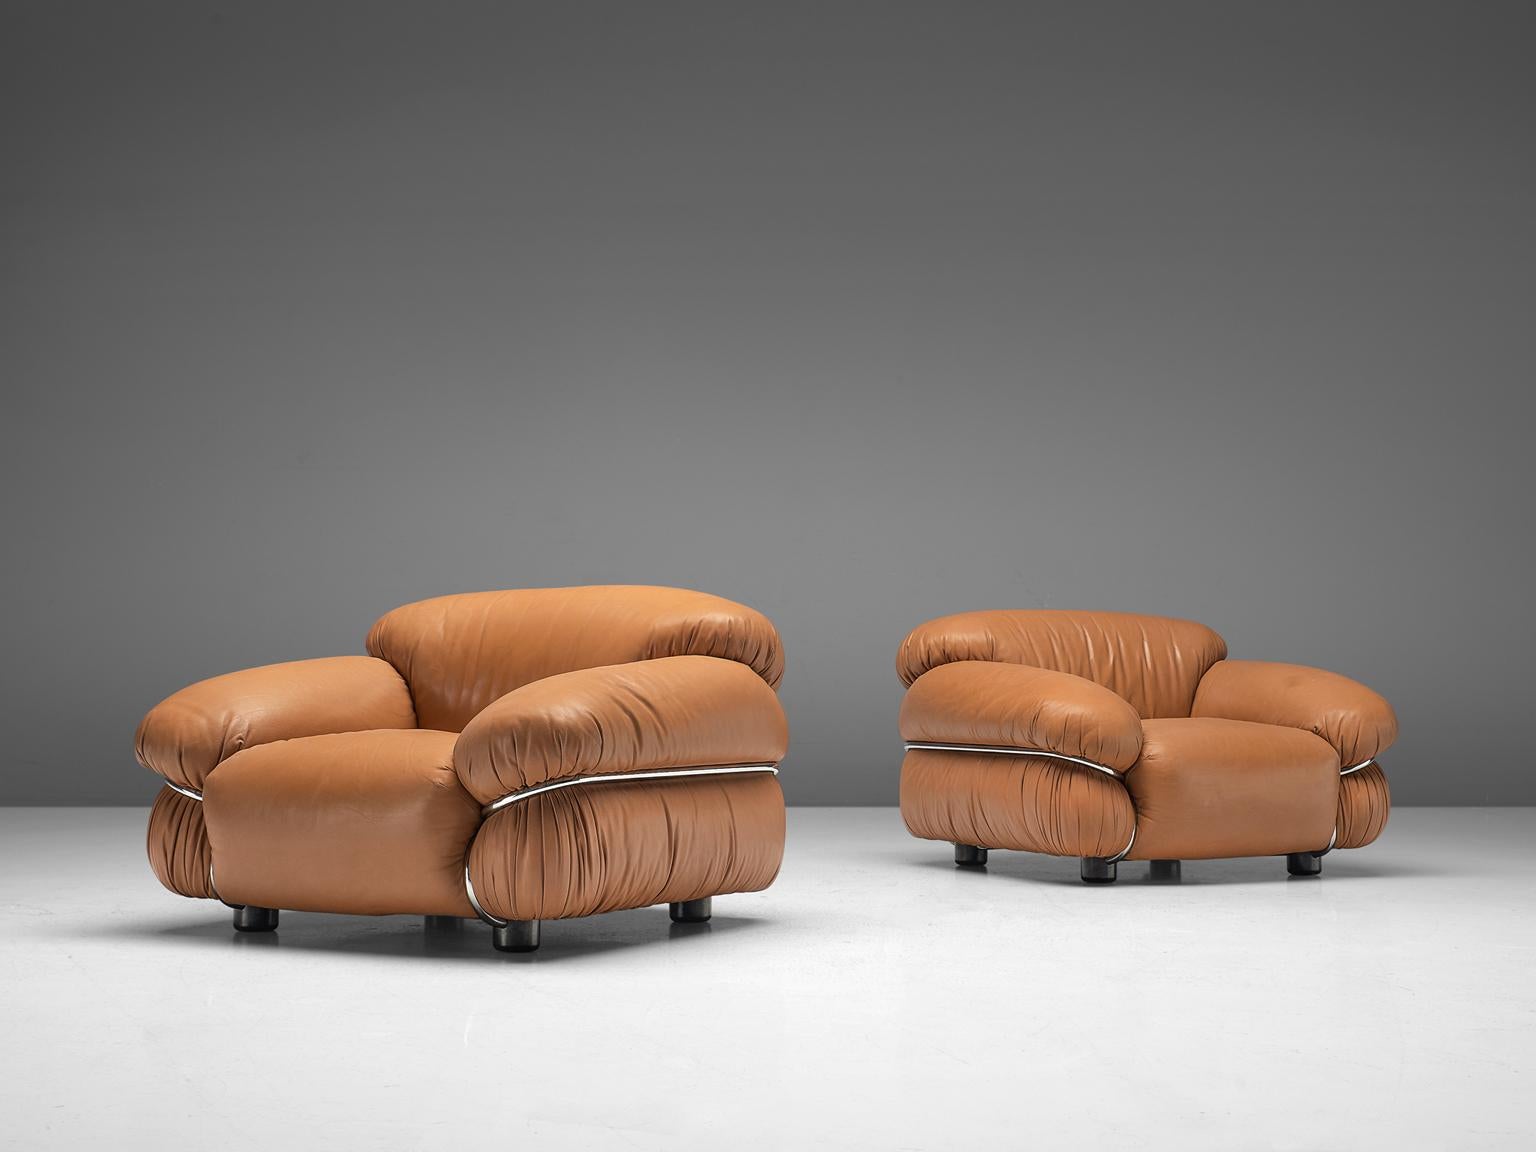 Gianfranco Frattini for Cassina, set of 2 'Sesann' lounge chairs, cognac leather and chrome plated steel, Italy, 1969.

These postmodern lounge chairs is designed by Gianfranco Frattini, the 'Sesann' works from the idea of informal sitting where